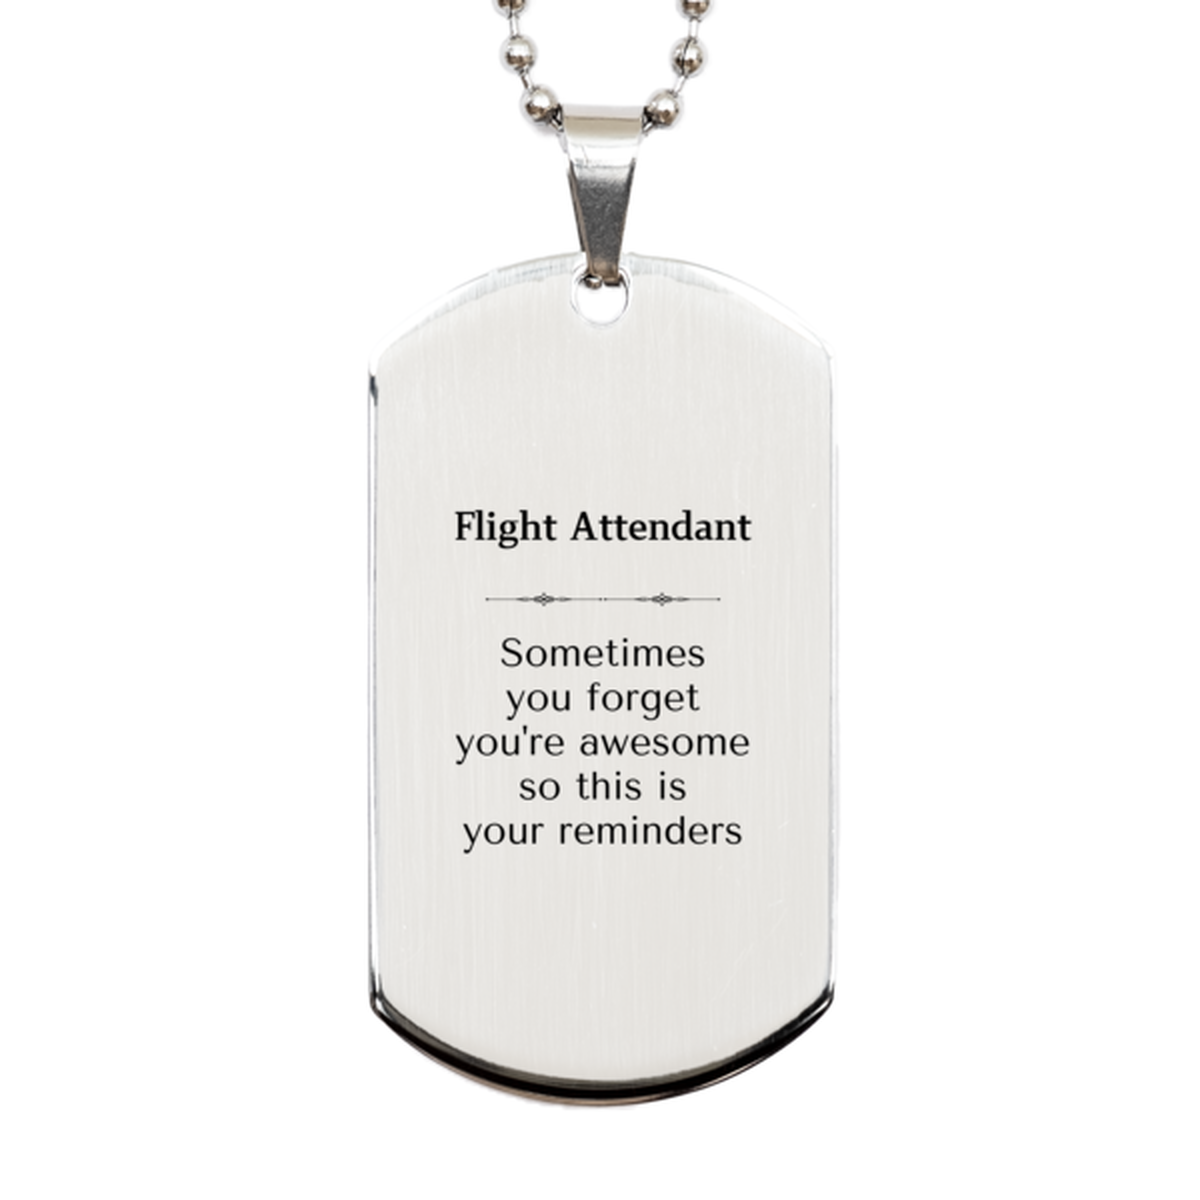 Sentimental Flight Attendant Silver Dog Tag, Flight Attendant Sometimes you forget you're awesome so this is your reminders, Graduation Christmas Birthday Gifts for Flight Attendant, Men, Women, Coworkers